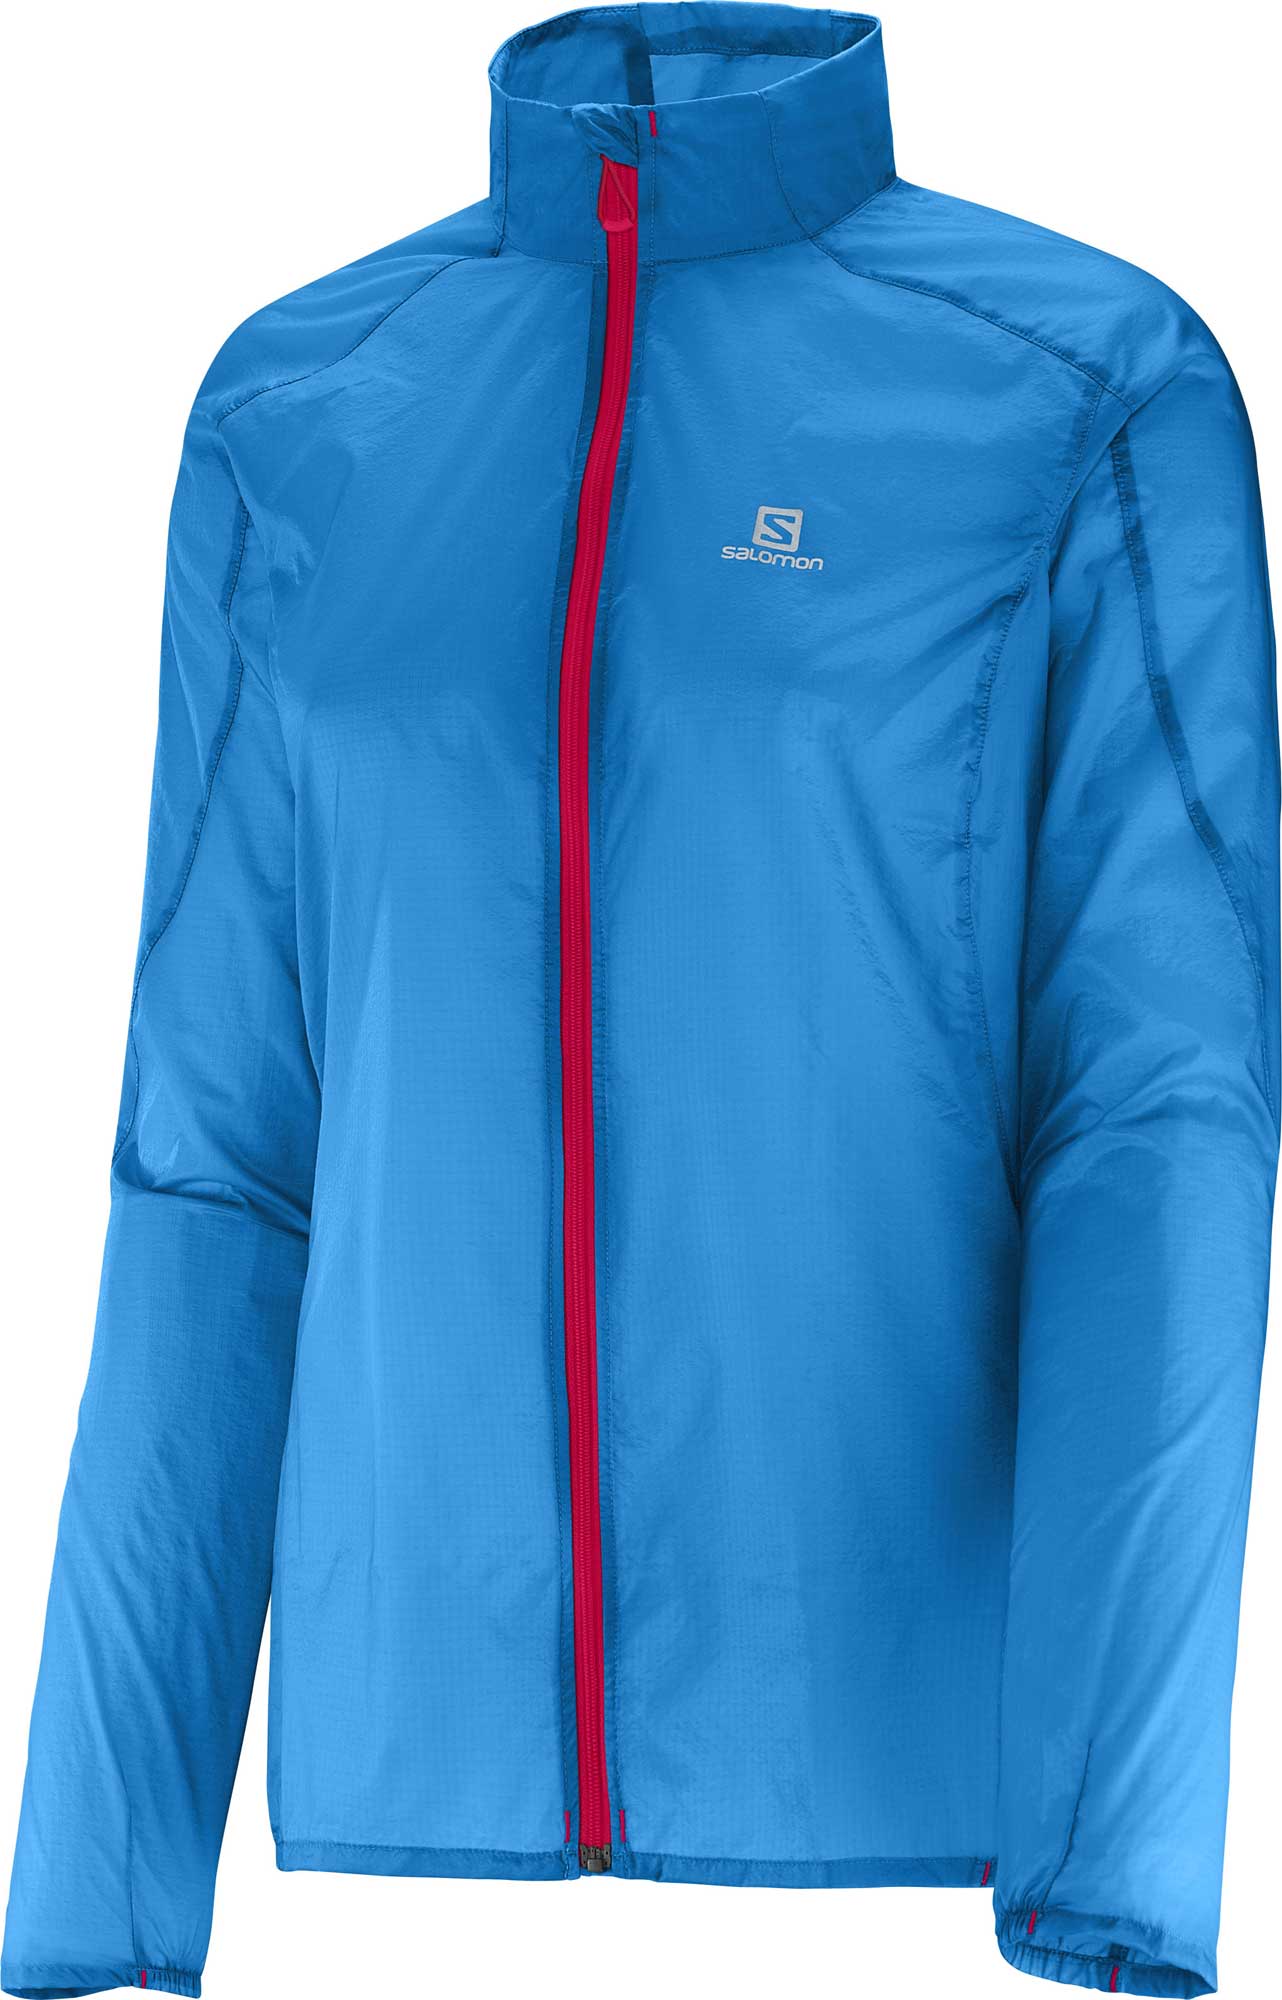 FAST WING JACKET W BL - Women´s sport jacket for racers or trail runners